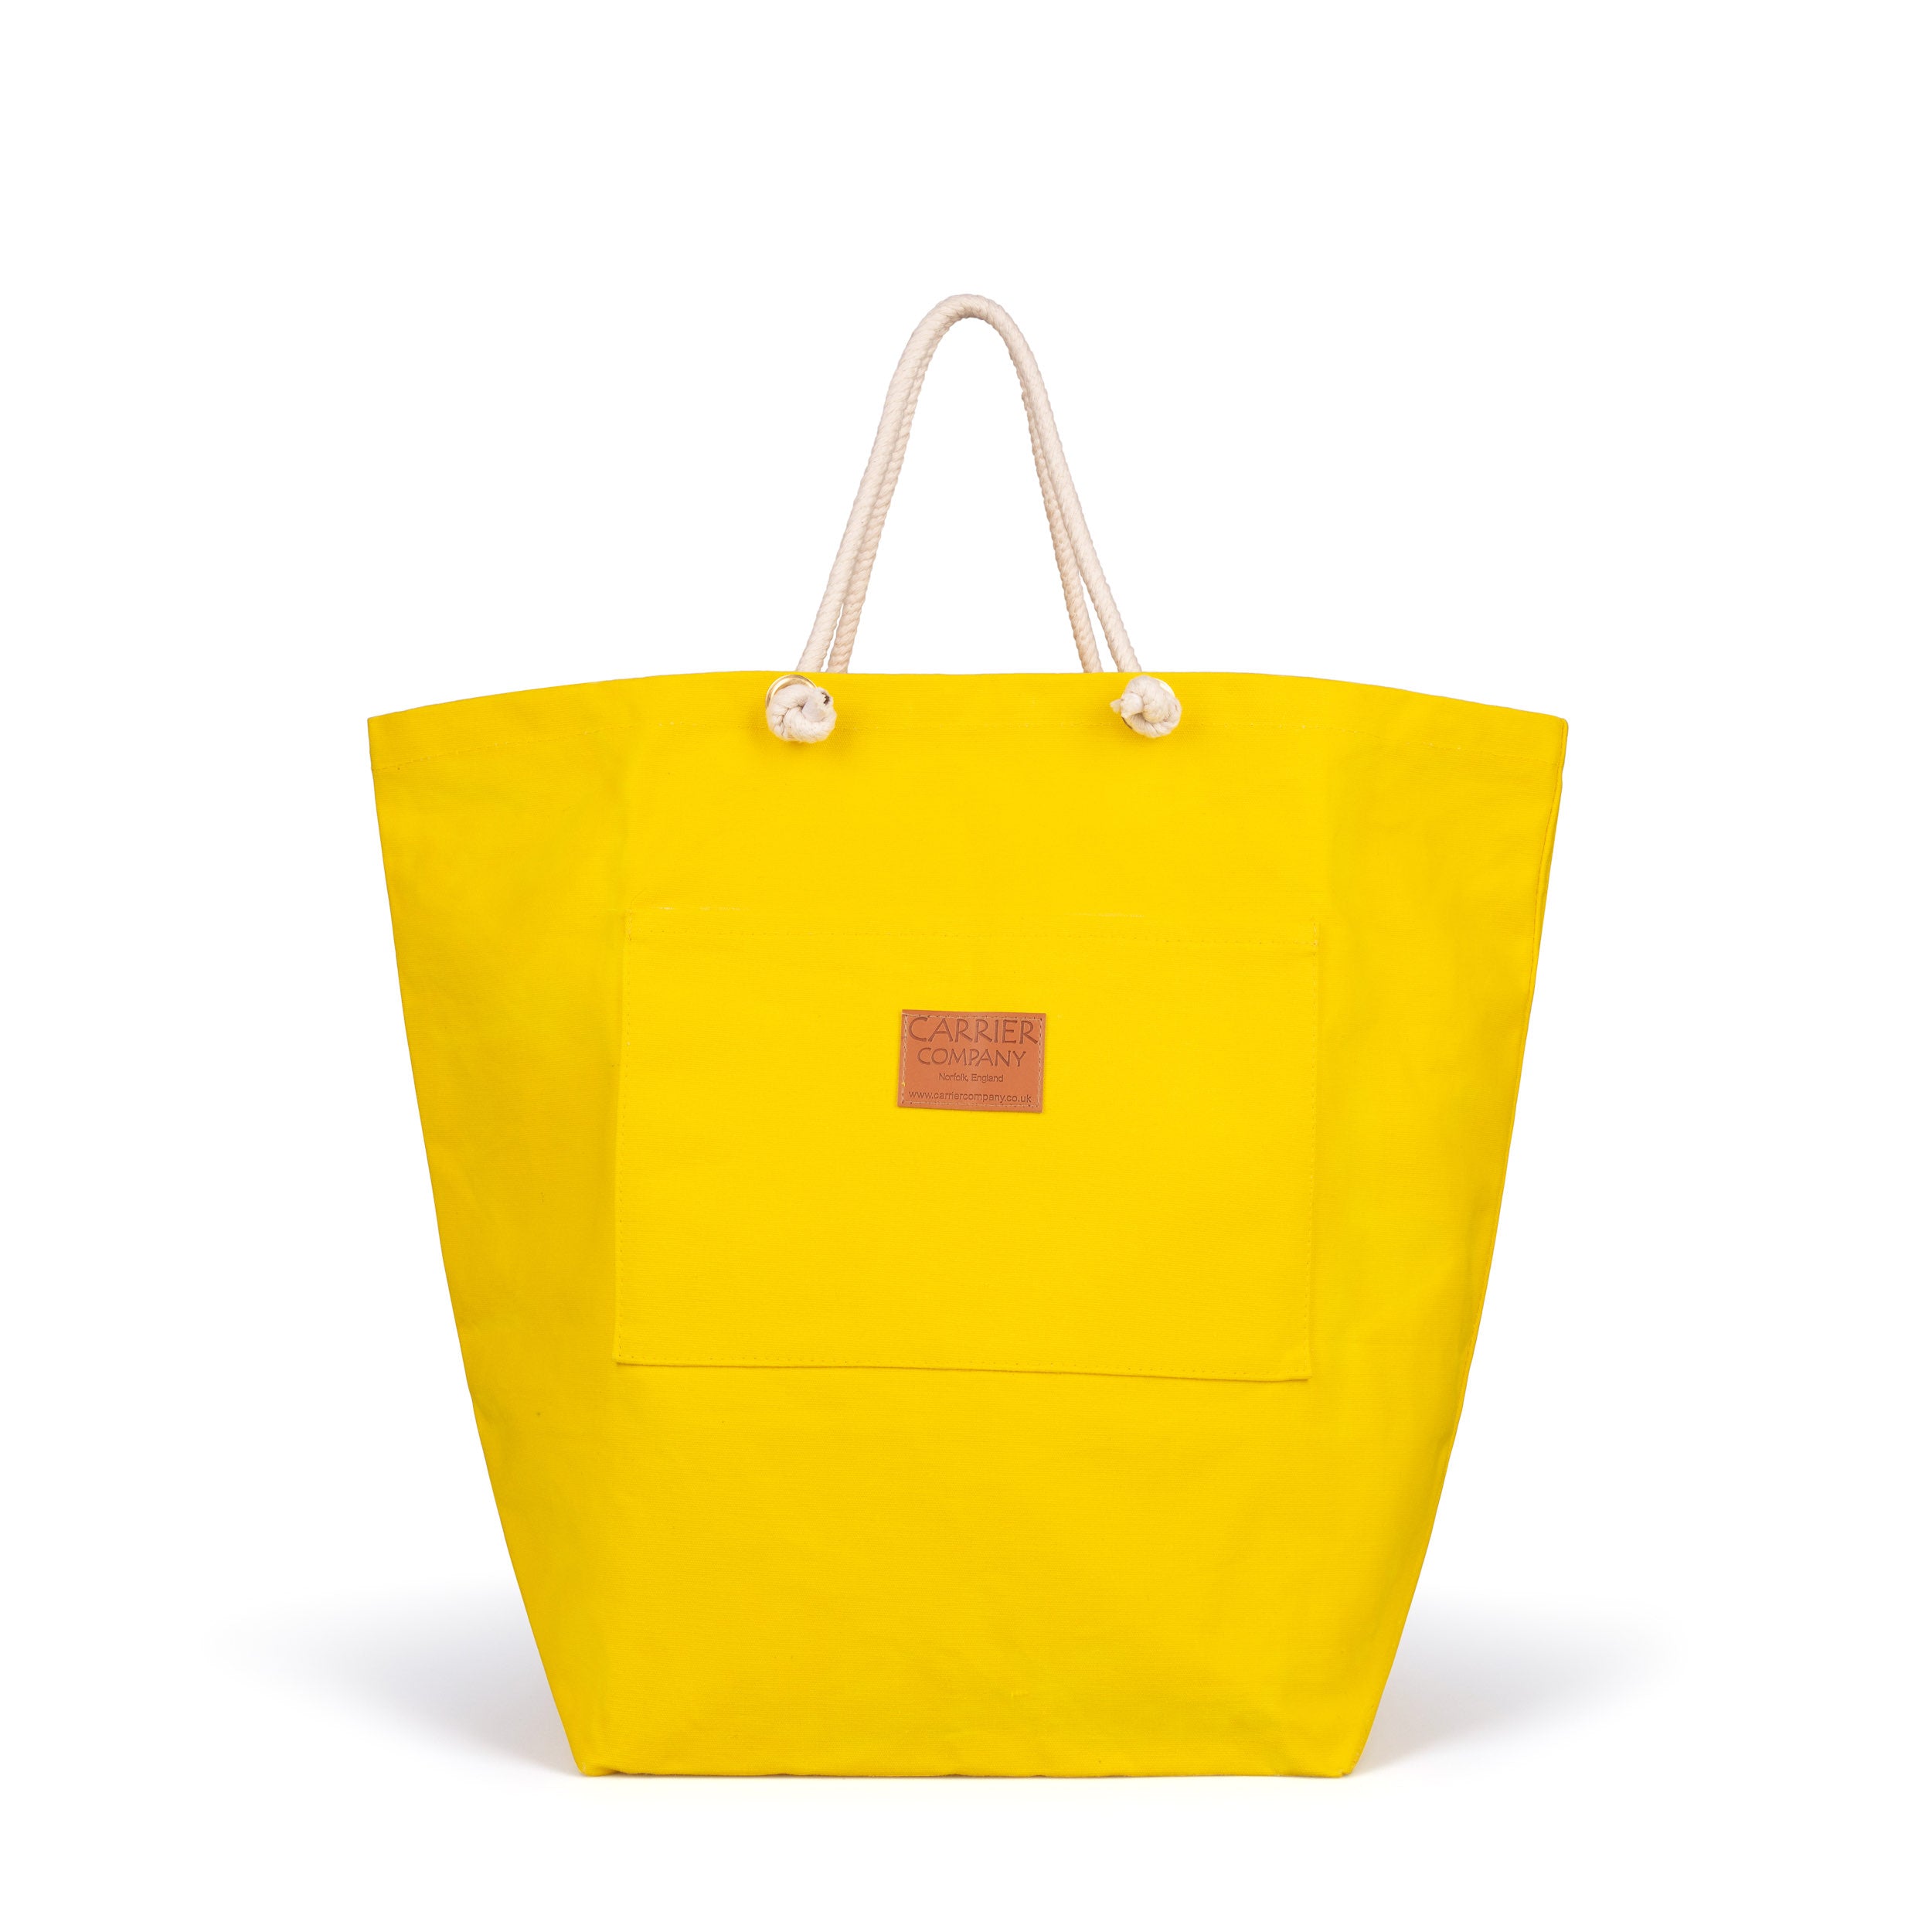 Carrier Company Beach Bag in Yellow Canvas